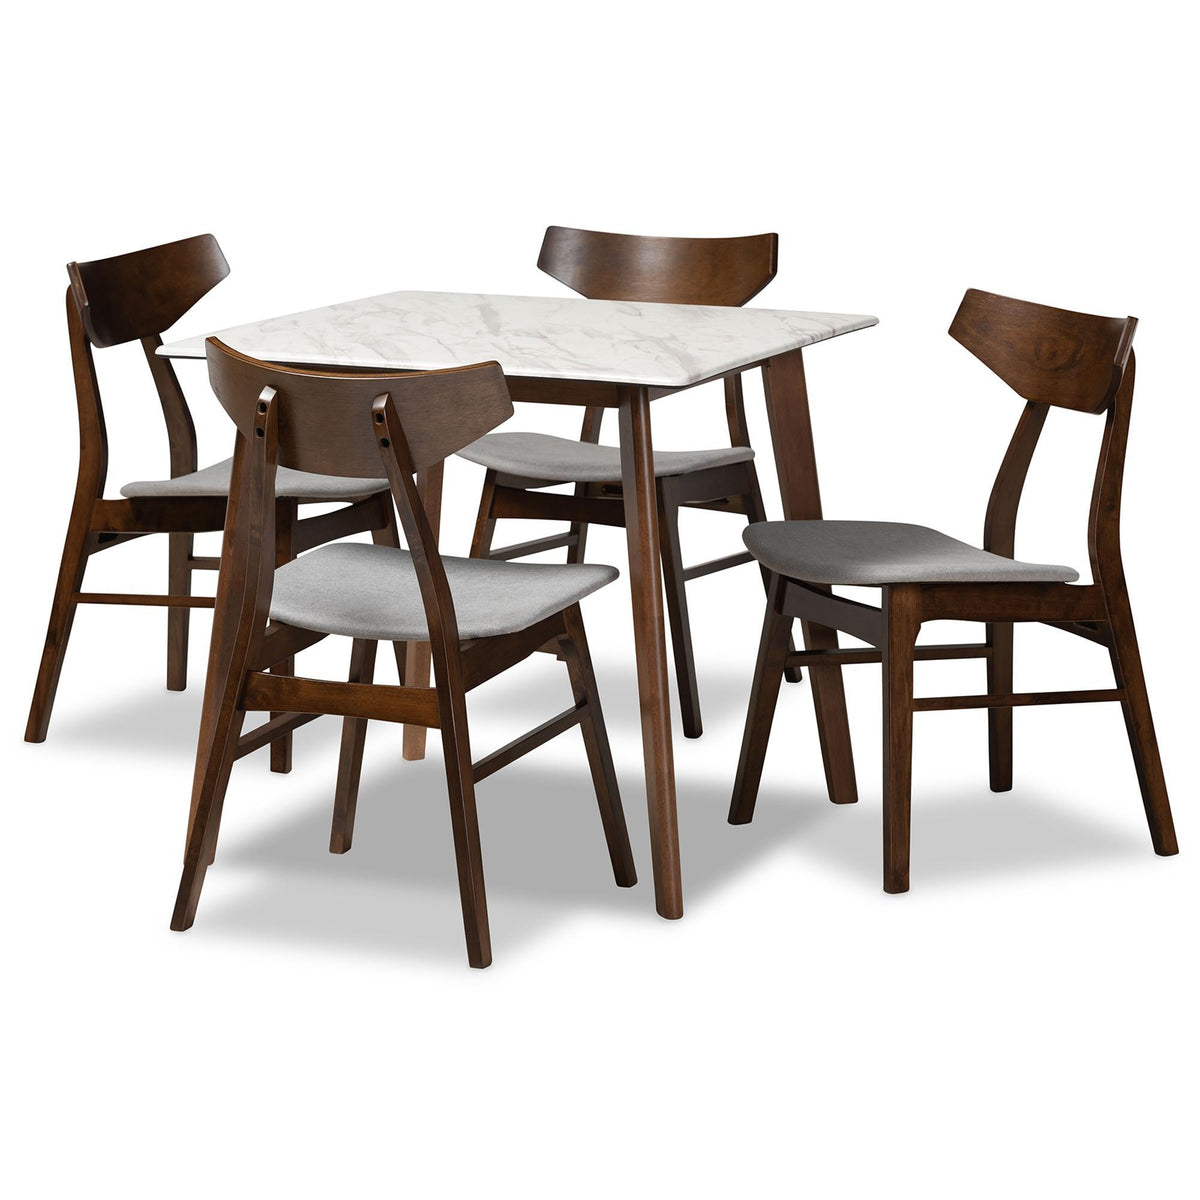 Baxton Studio Pearson Mid-Century Modern Transitional Light Grey Fabric Upholstered And Walnut Brown Finished Wood 5-Piece Dining Set With Faux Marble Table - Pearson-Smoke/Walnut-5PC Dining Set